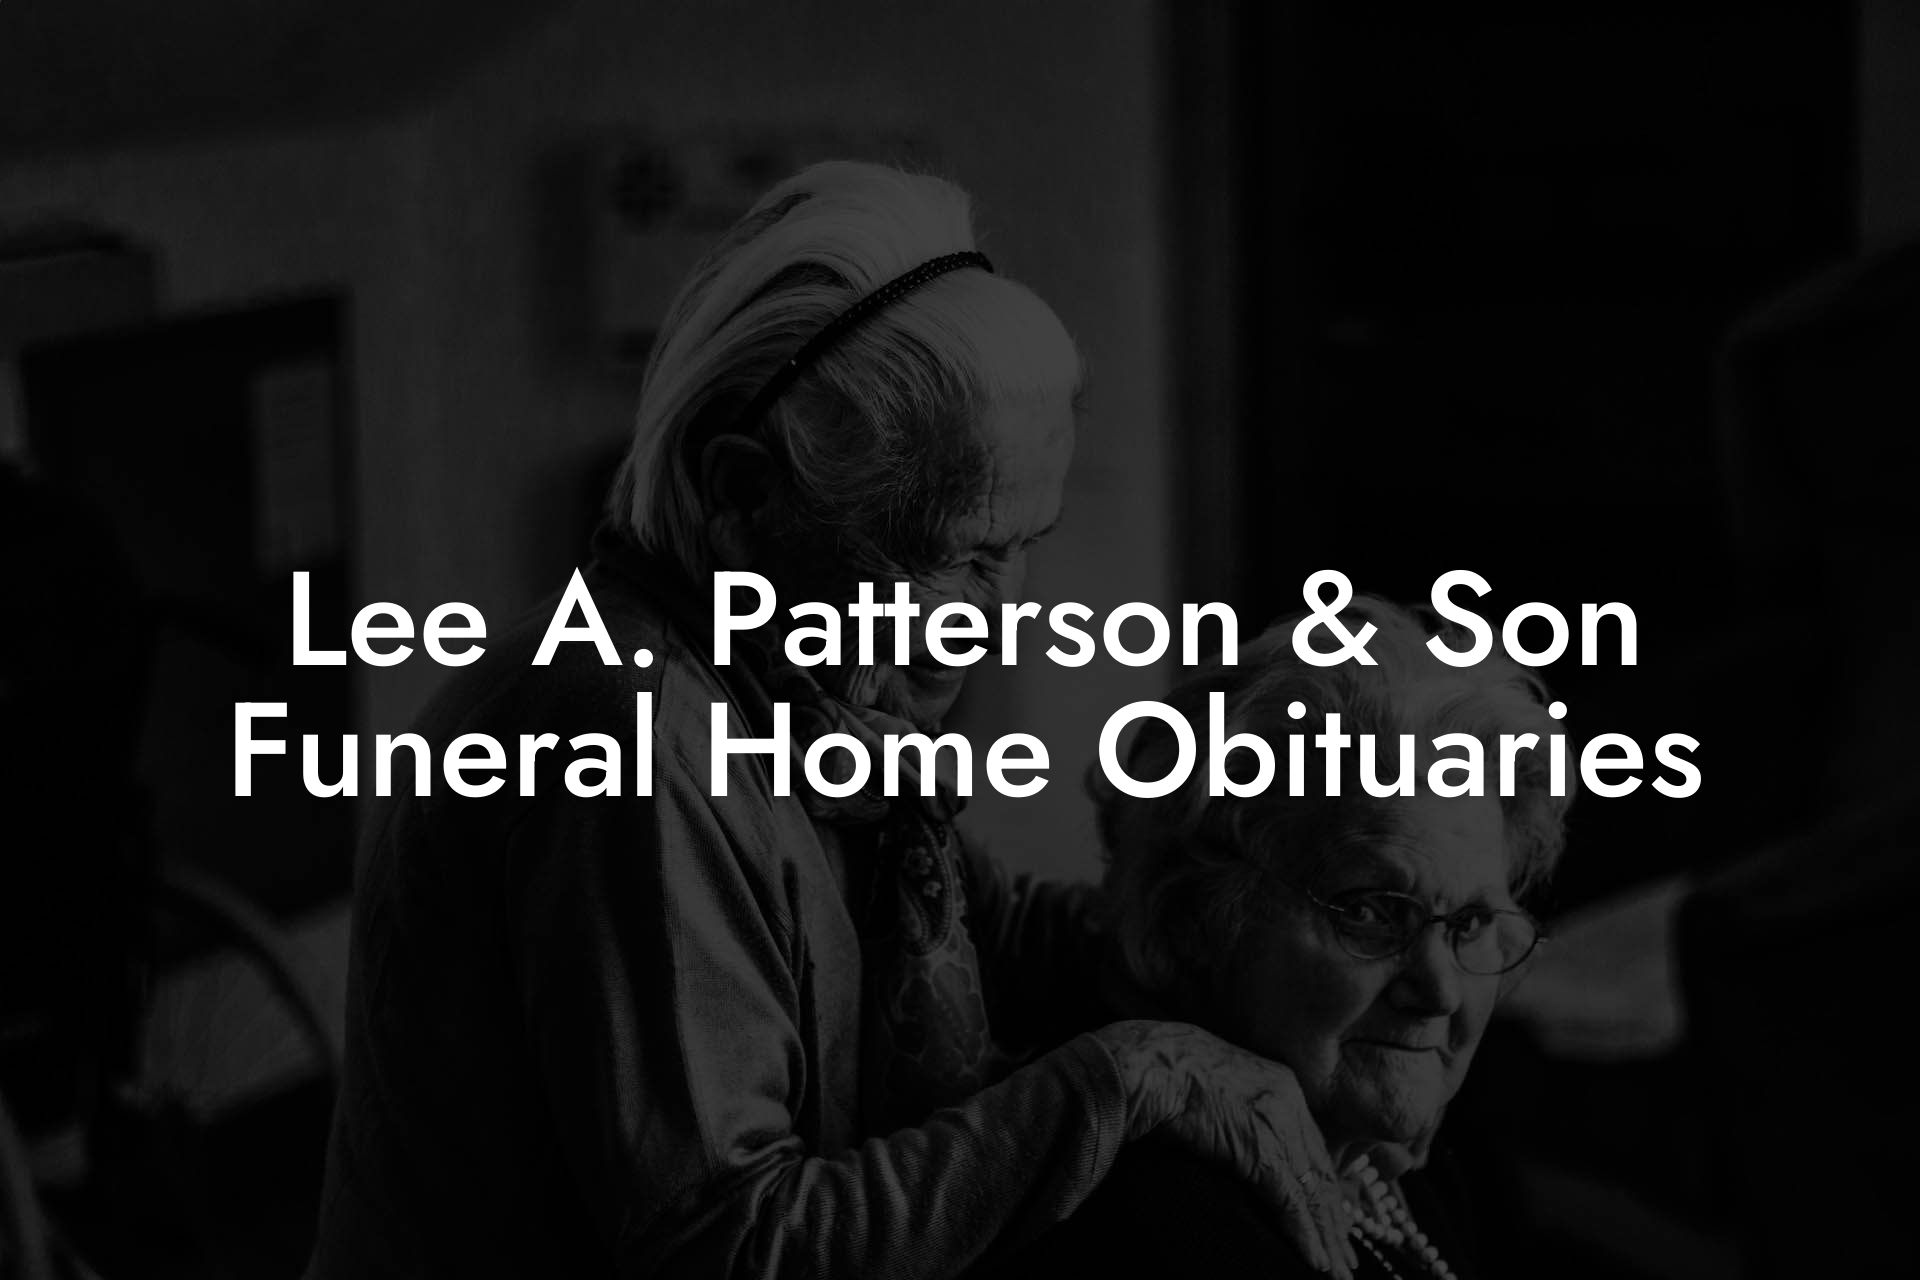 Lee A. Patterson & Son Funeral Home Obituaries